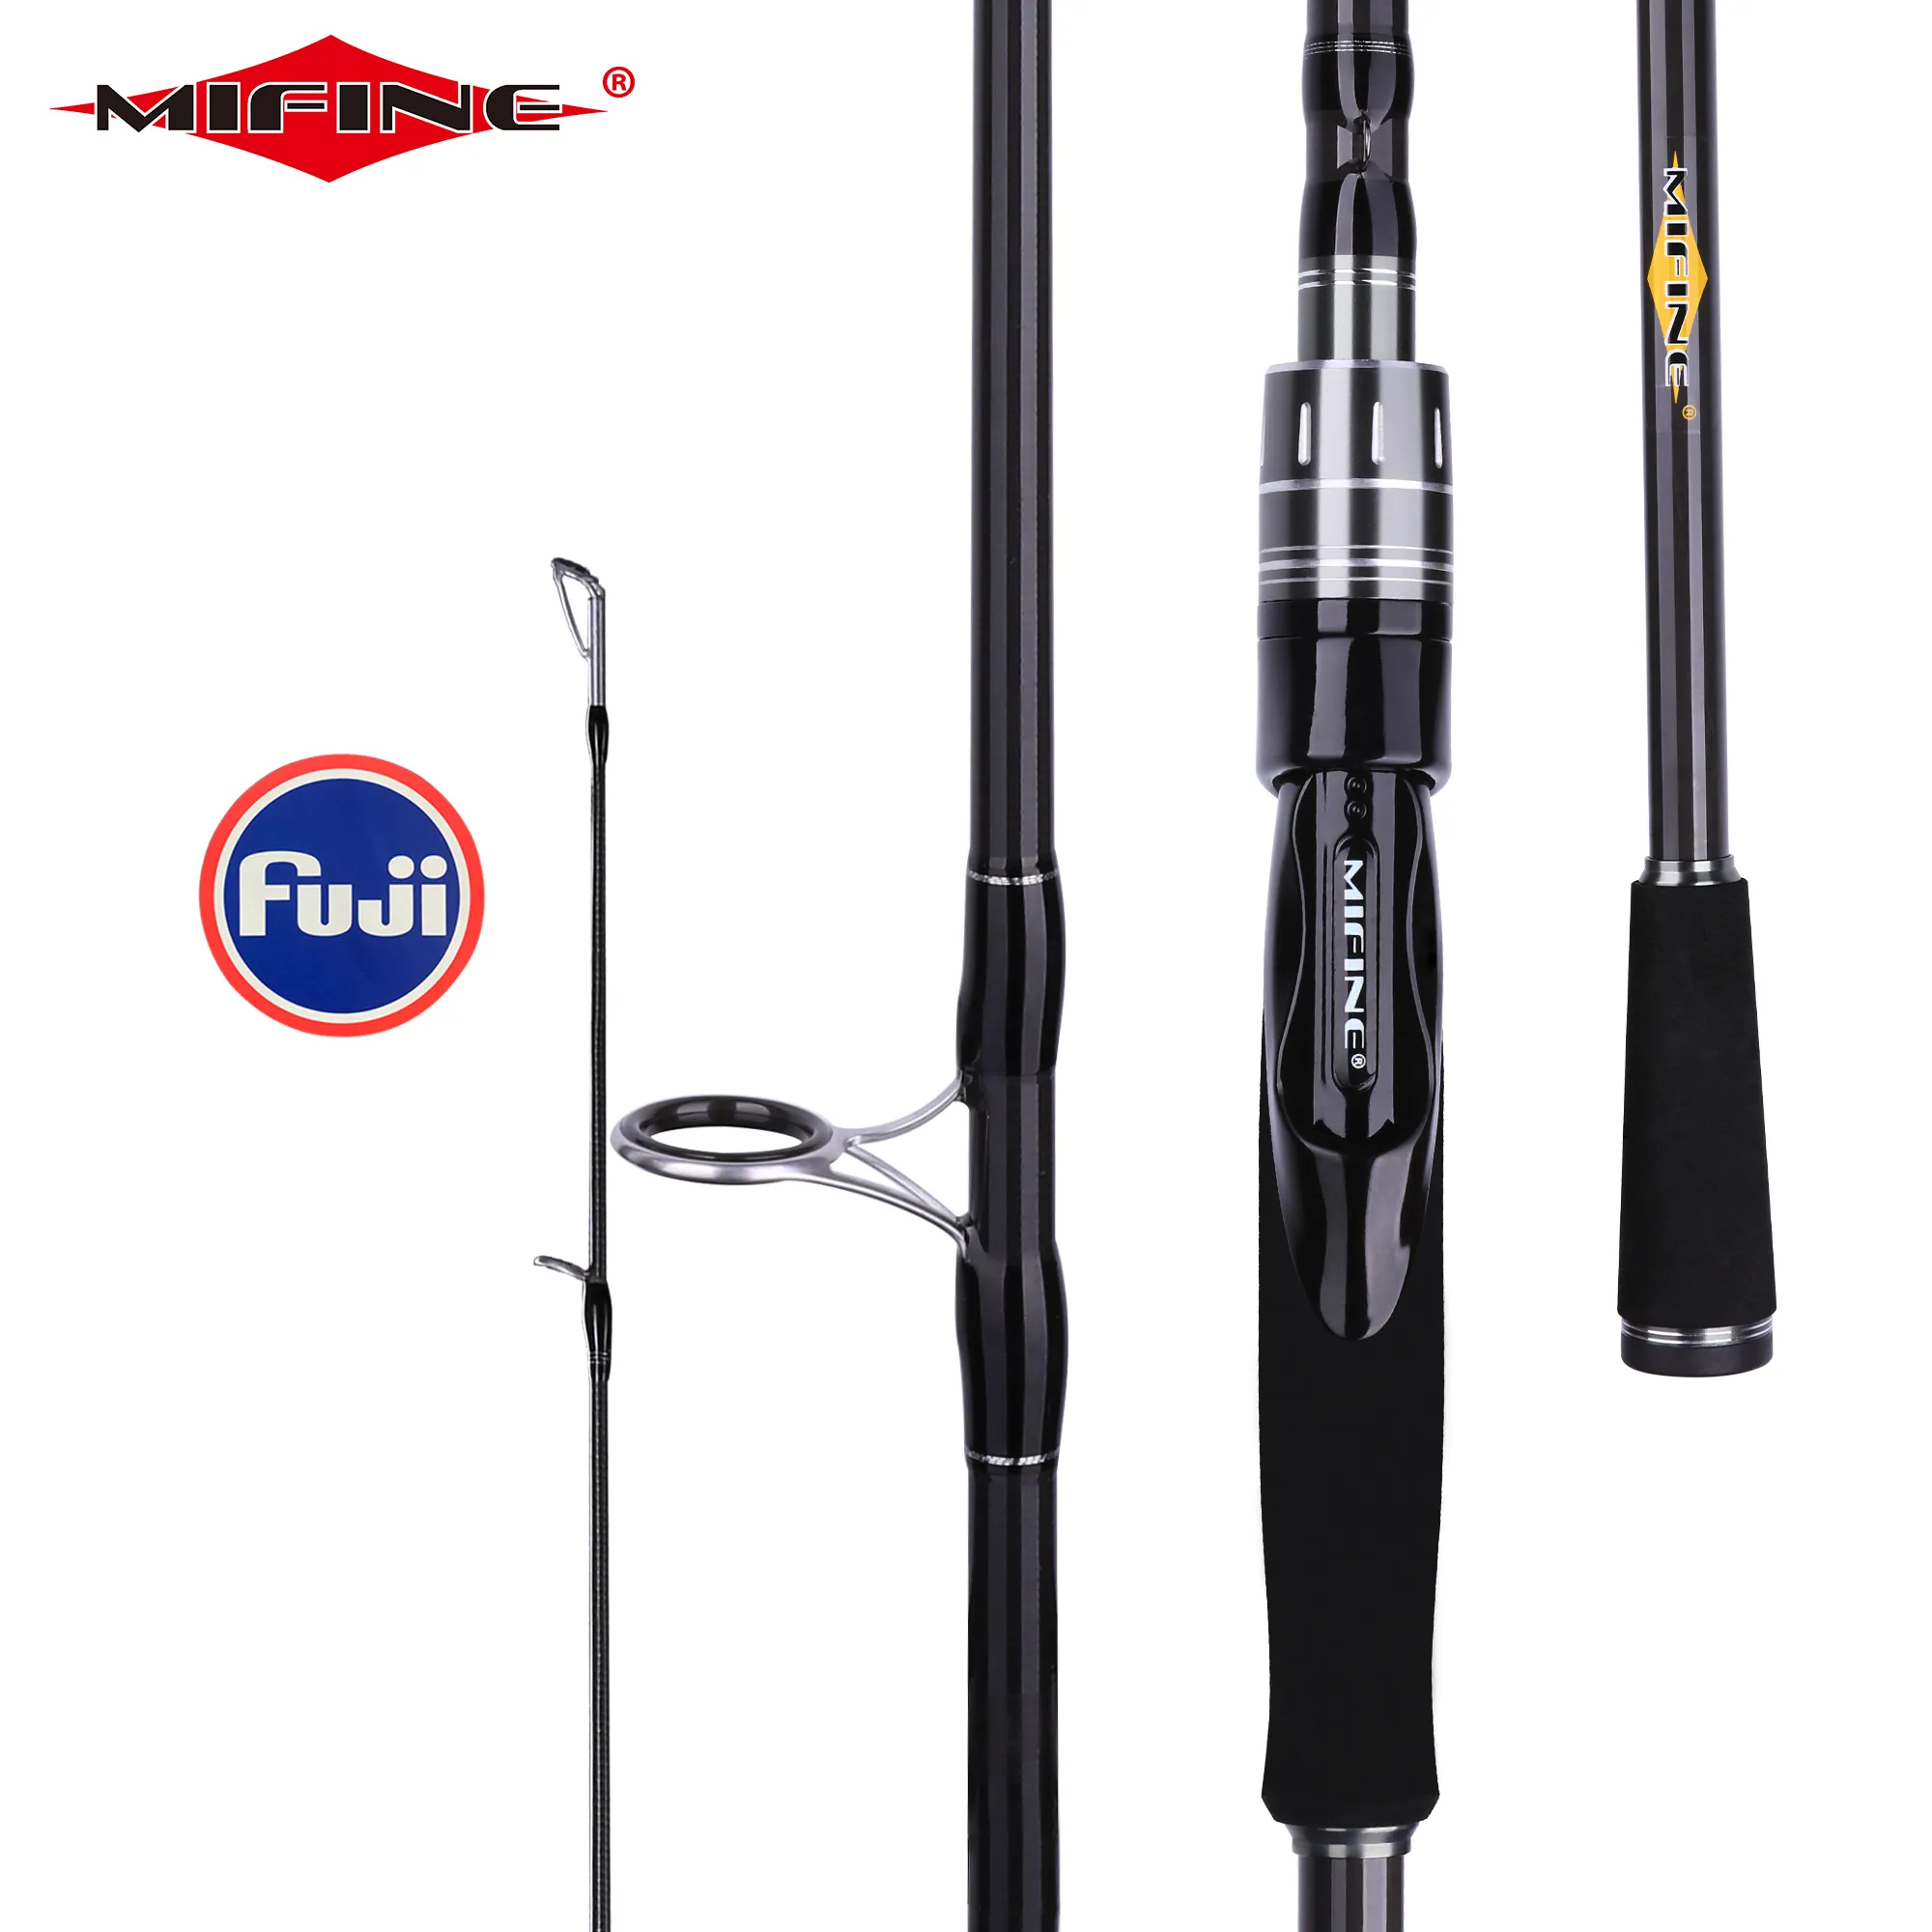 MIFINE MAXIMUS Spinning Bait Casting Lure Fishing Rod 30T Carbon FUJI  Guides 3 50gML/M/MH Contain 1.68m To 3.00m Travel Pole Q1203 From Musuo10,  $55.76